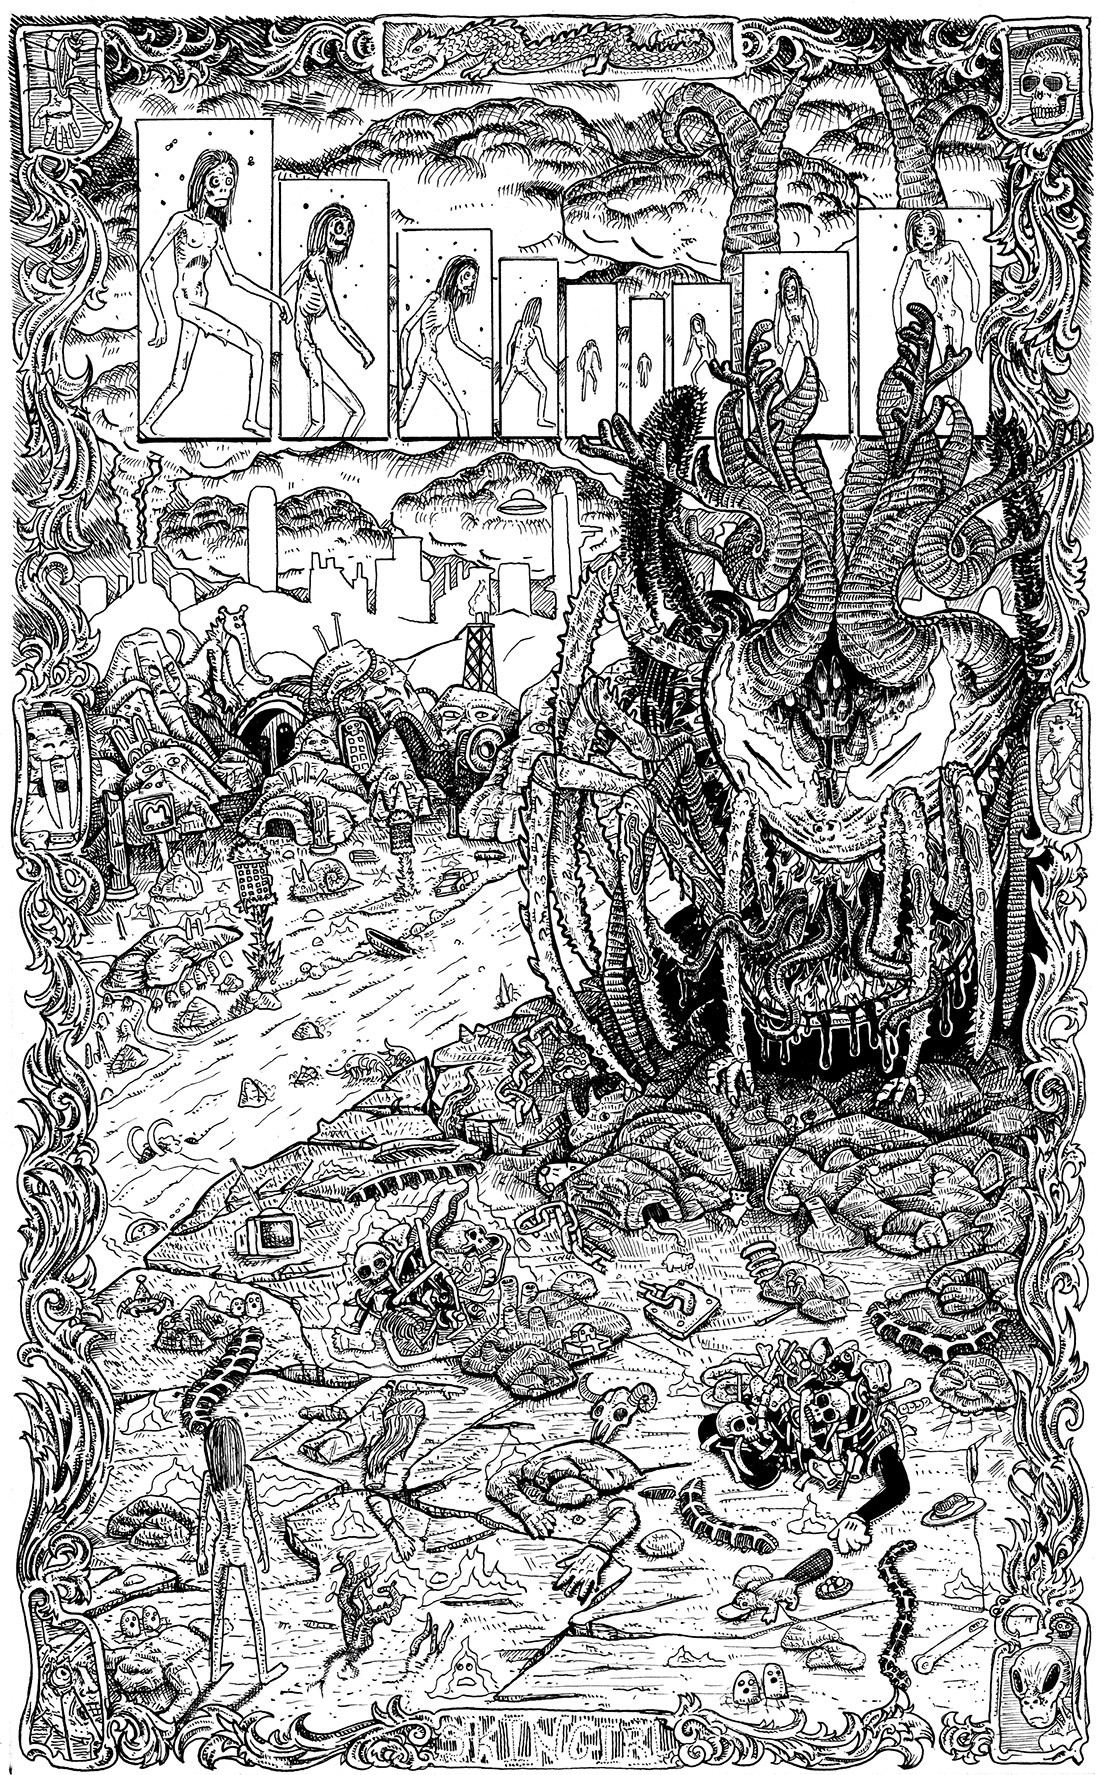 A black and white inked full page landscape of hell, with a river of blood running into the distance. Several panels of skingirl receding into the distance and coming back. A giant clam-like demon with many legs and horns looms over skin girl, tiny in the foreground.